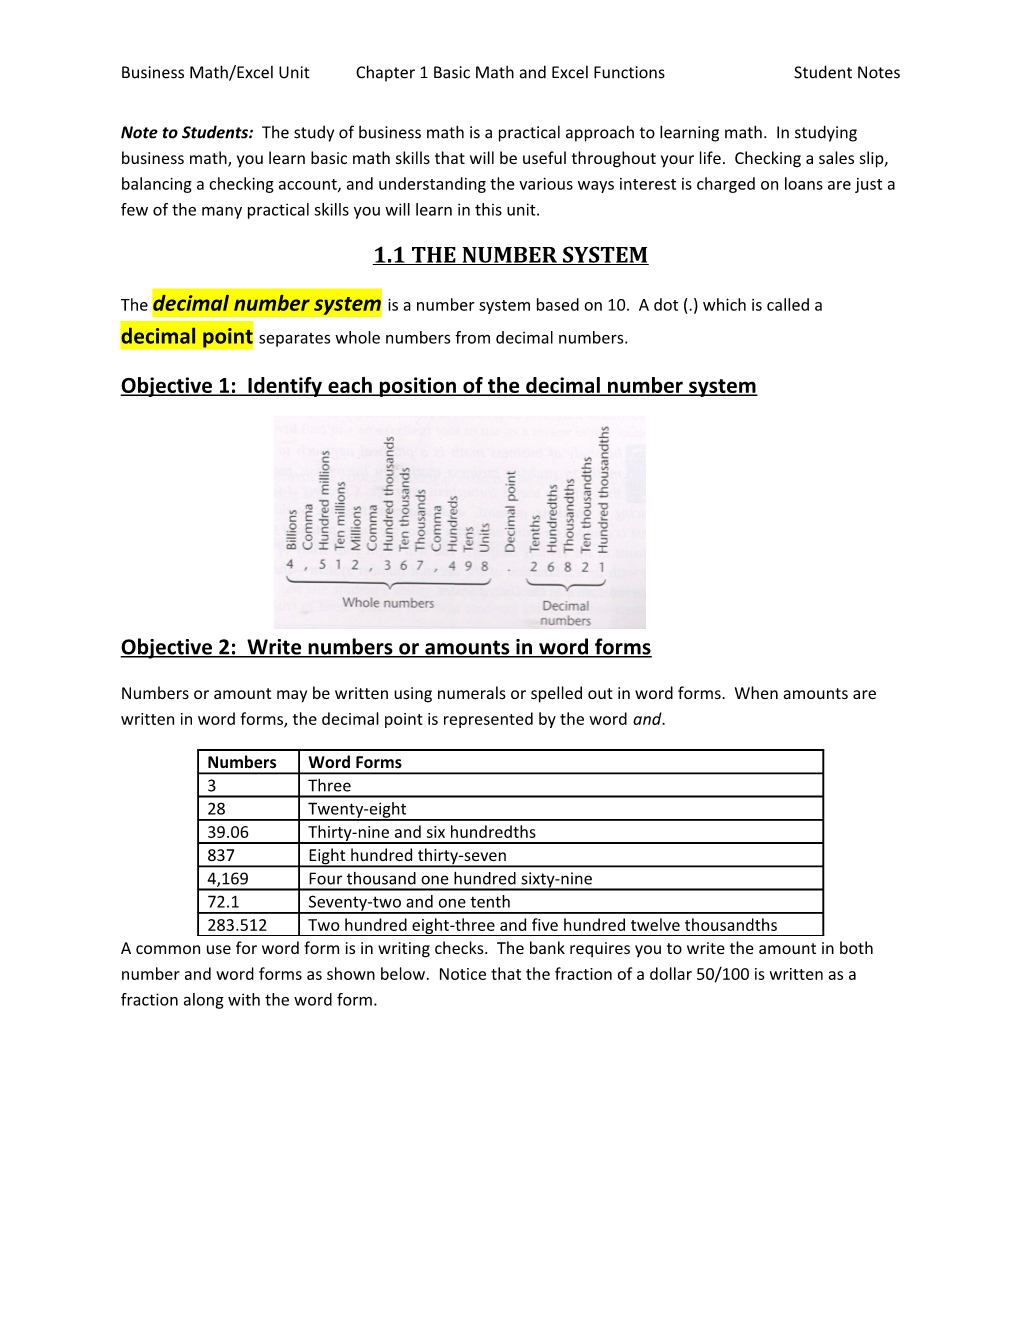 Business Math/Excel Unitchapter 1 Basic Math and Excel Functionsstudent Notes